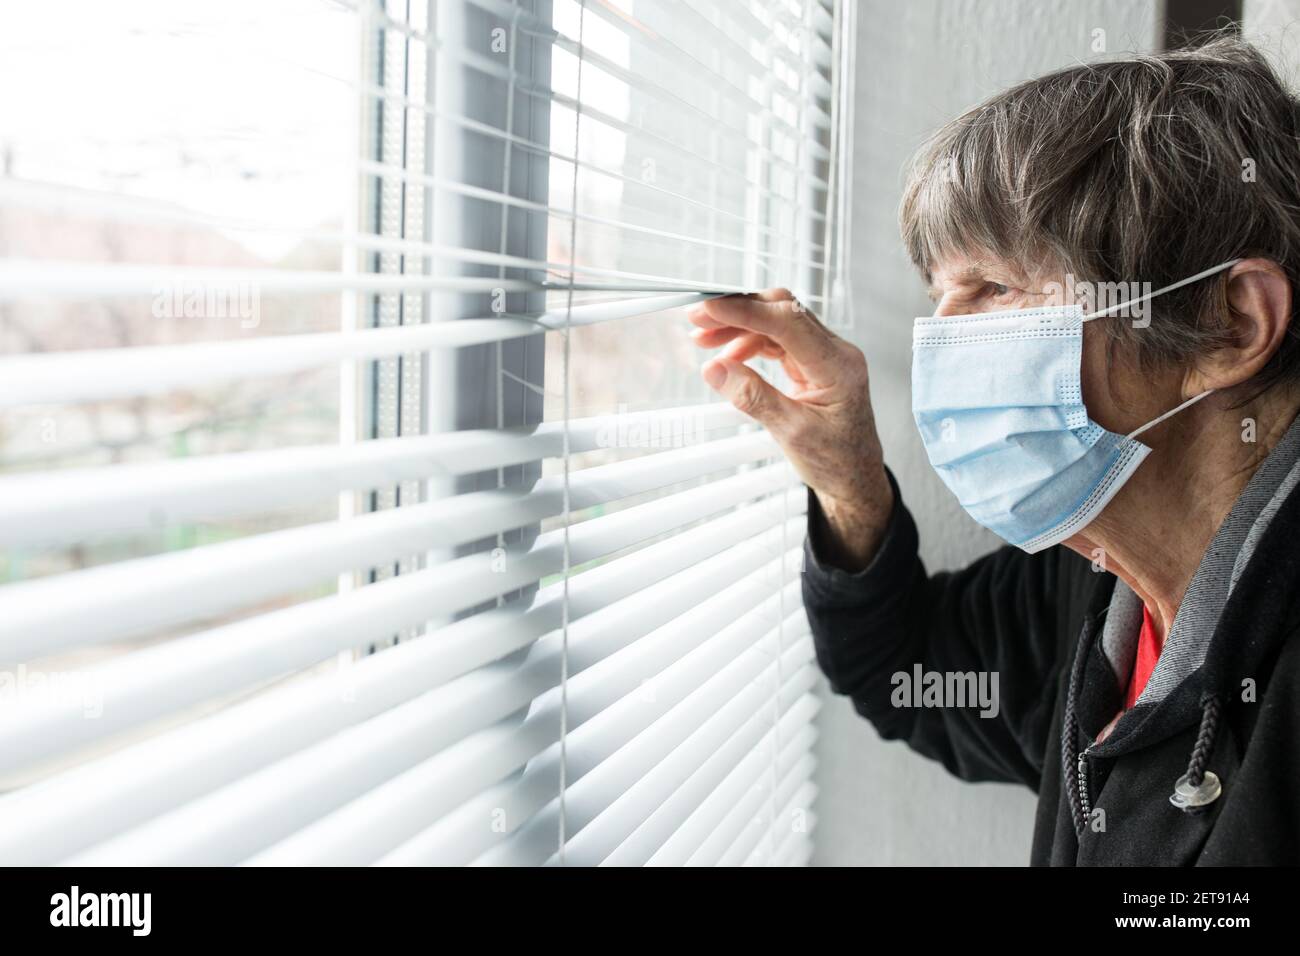 An elderly woman in a medical mask looks out the window. Stock Photo